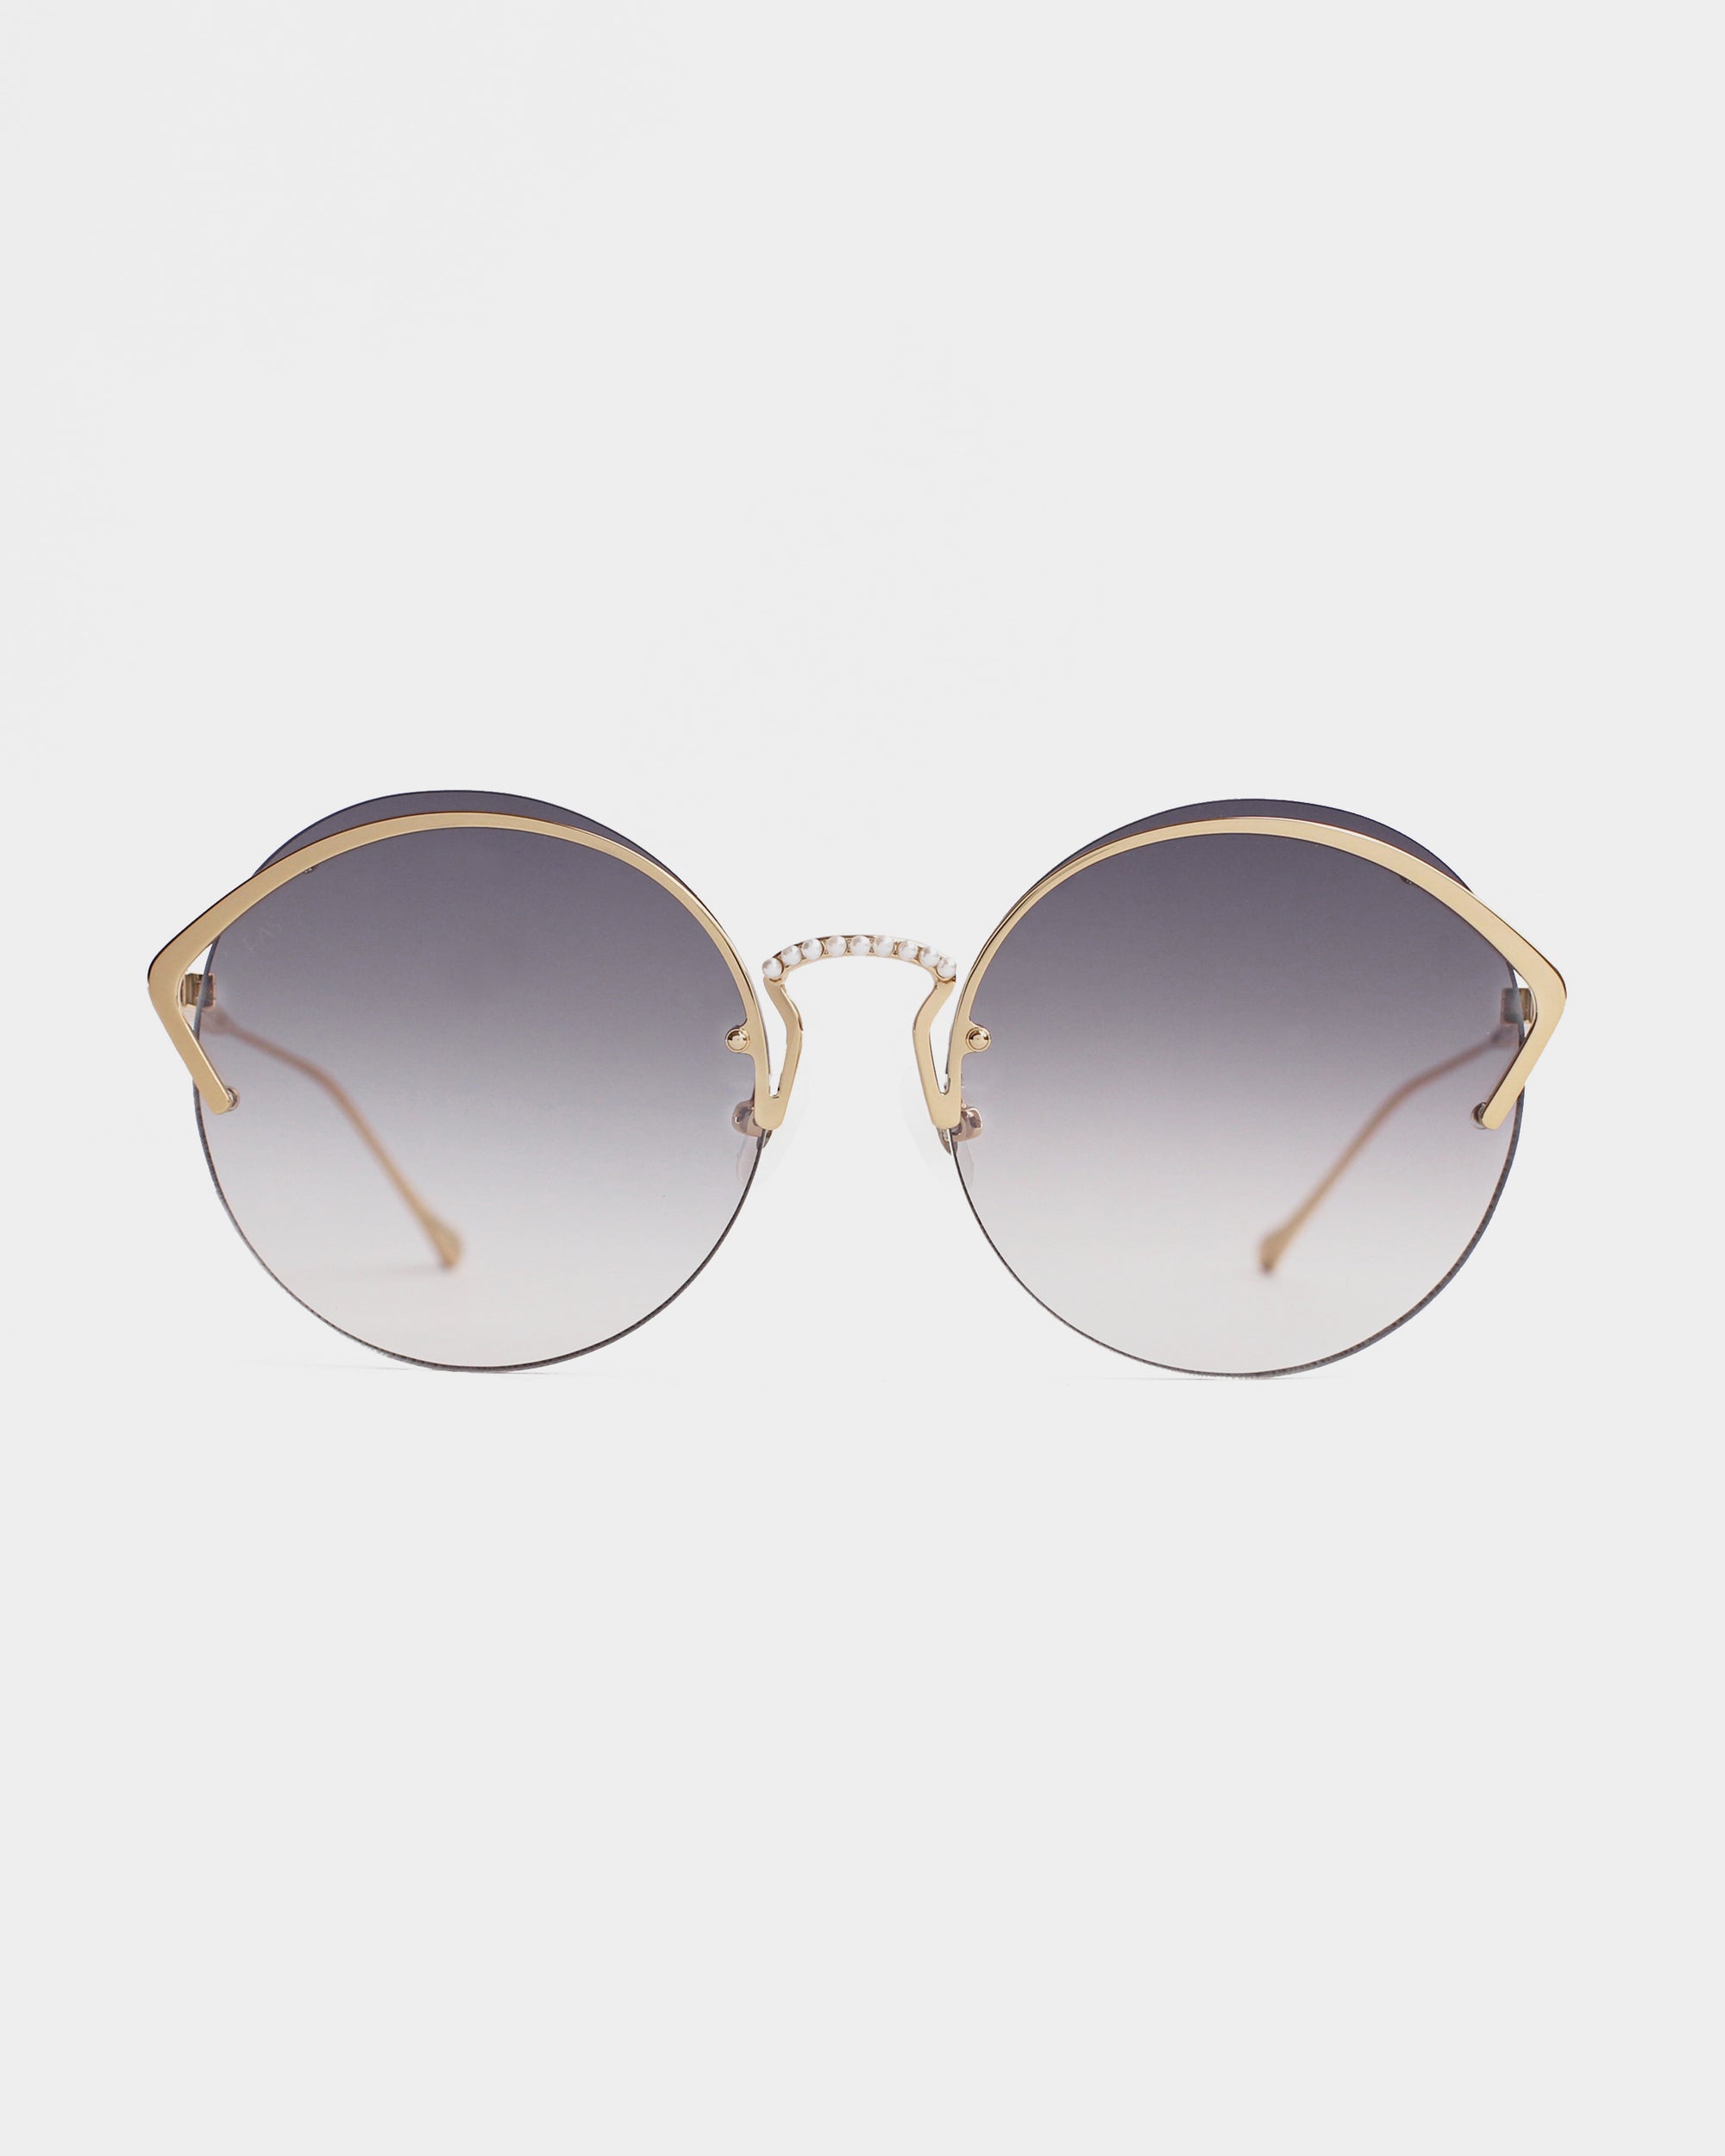 A pair of stylish round sunglasses with gradient nylon lenses fading from dark at the top to light at the bottom. The frame is gold-toned stainless steel featuring intricate metalwork near the hinges, and the nose bridge sports a small bar design, providing essential UV protection. The background is plain white. Introducing Margarita by For Art&#39;s Sake®.